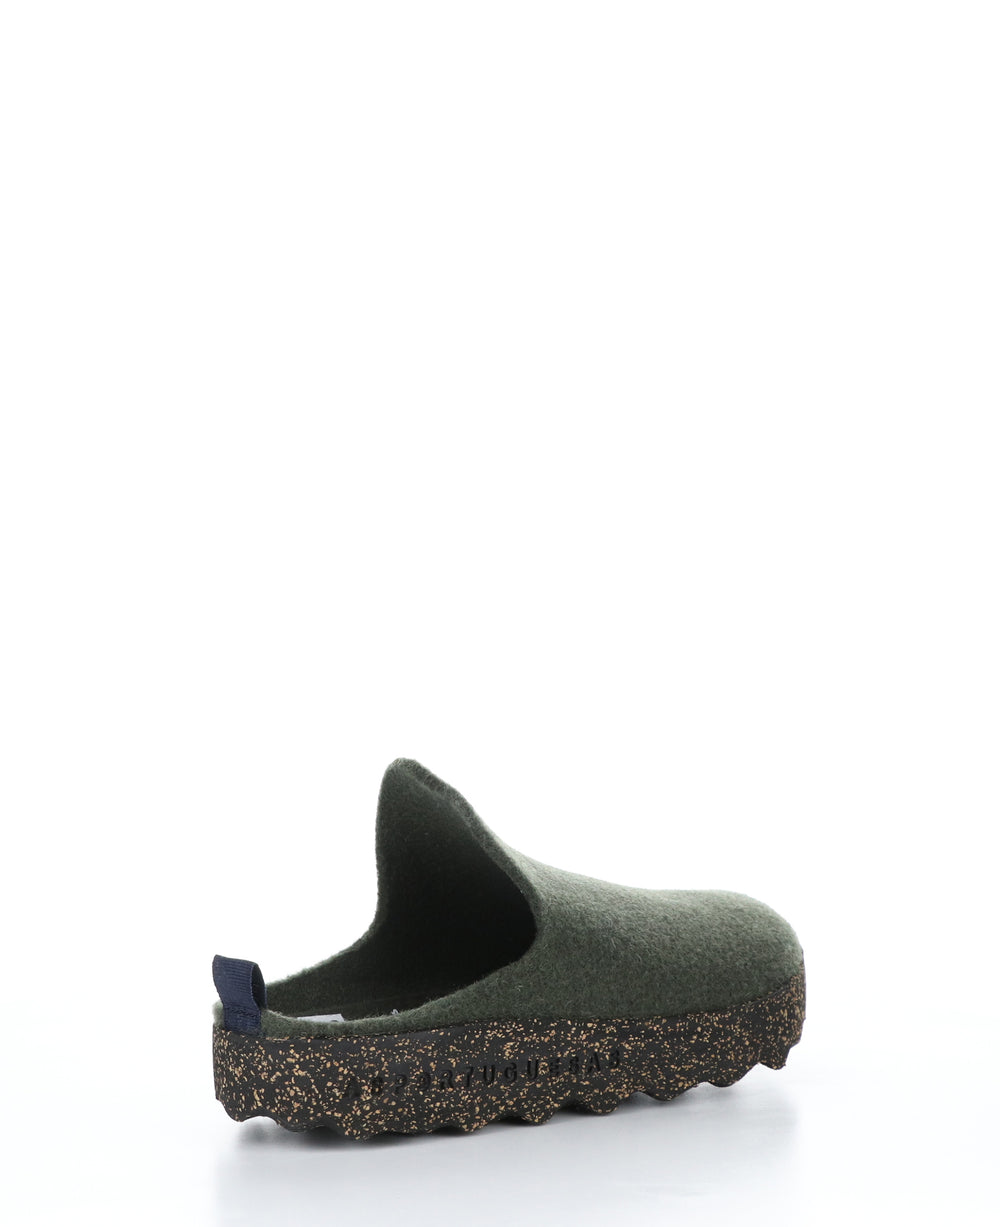 COME061ASPM Military Green Round Toe Shoes